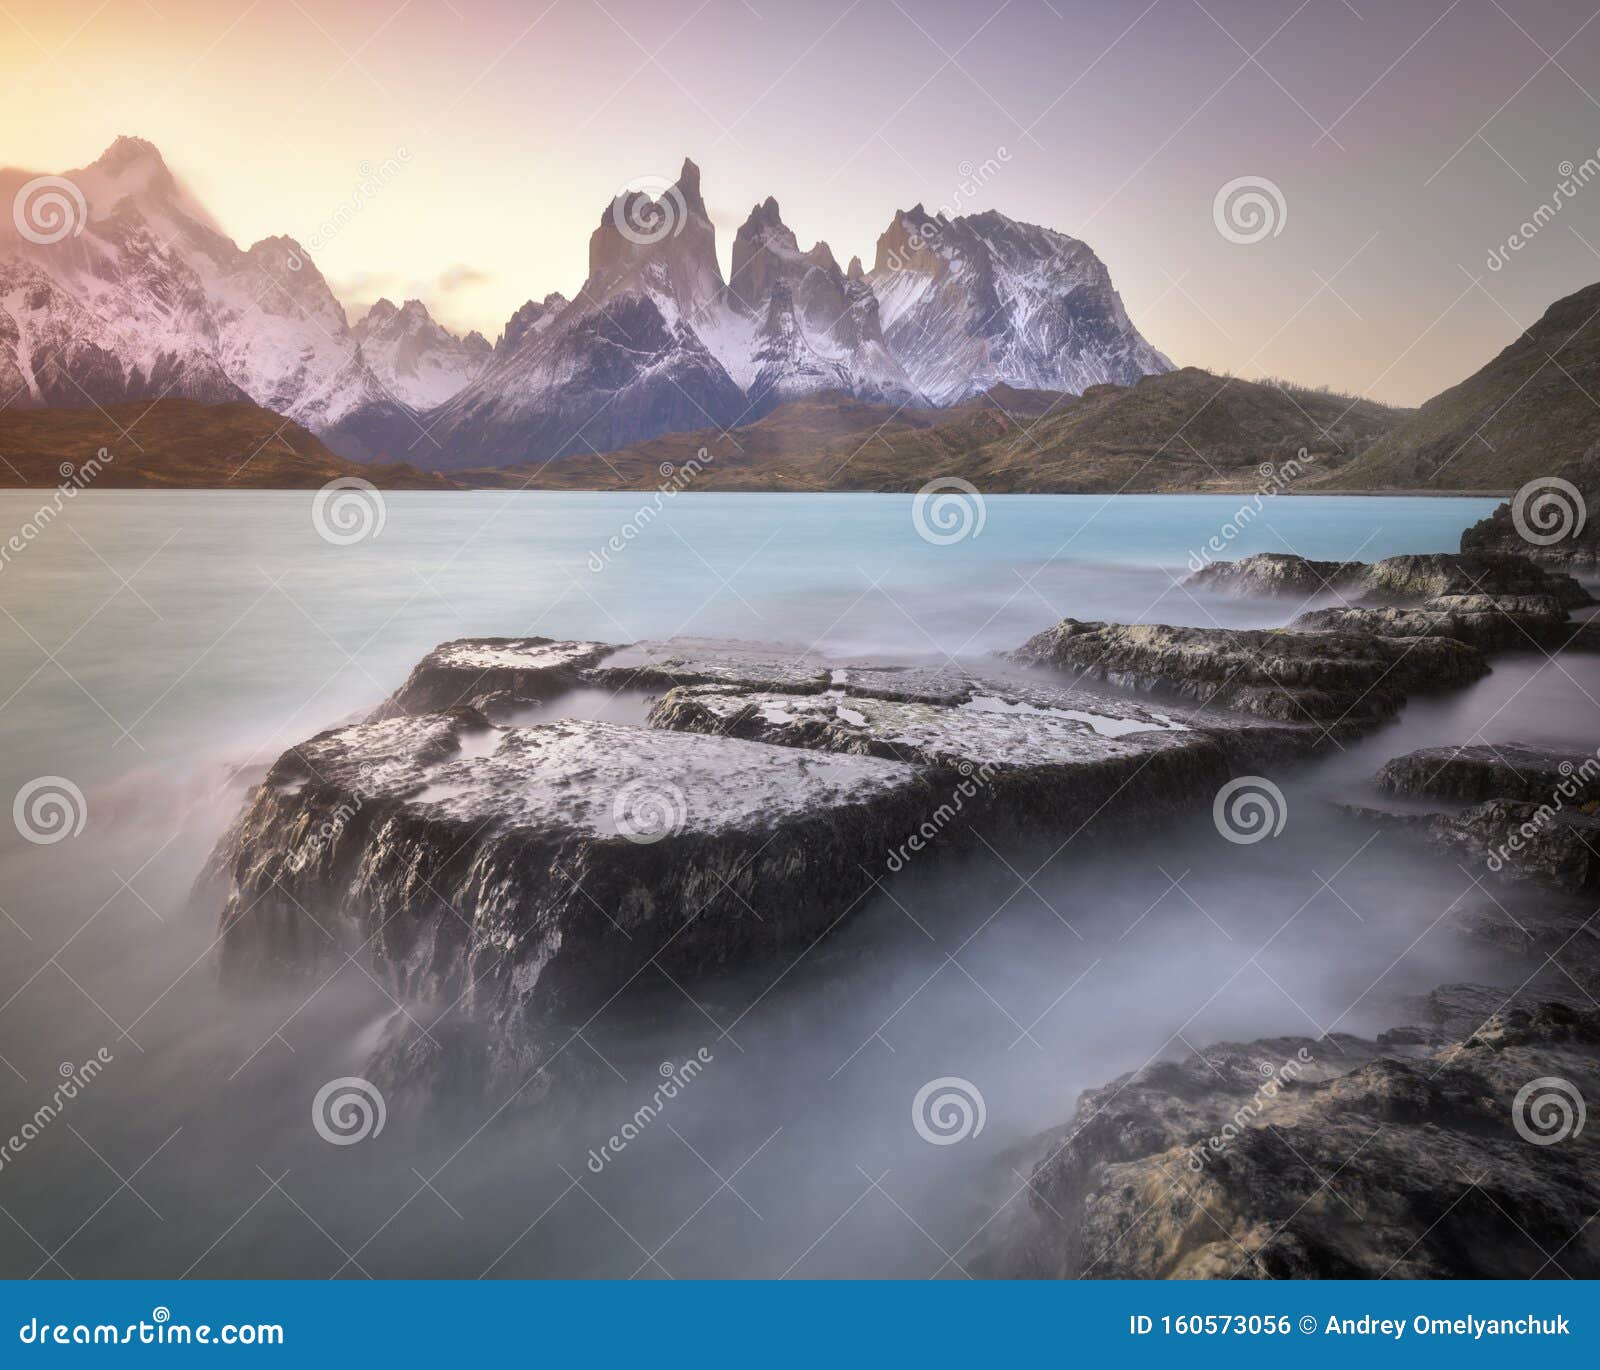 pehoe lake and cuernos peaks in the evening, torres del paine national park, chile